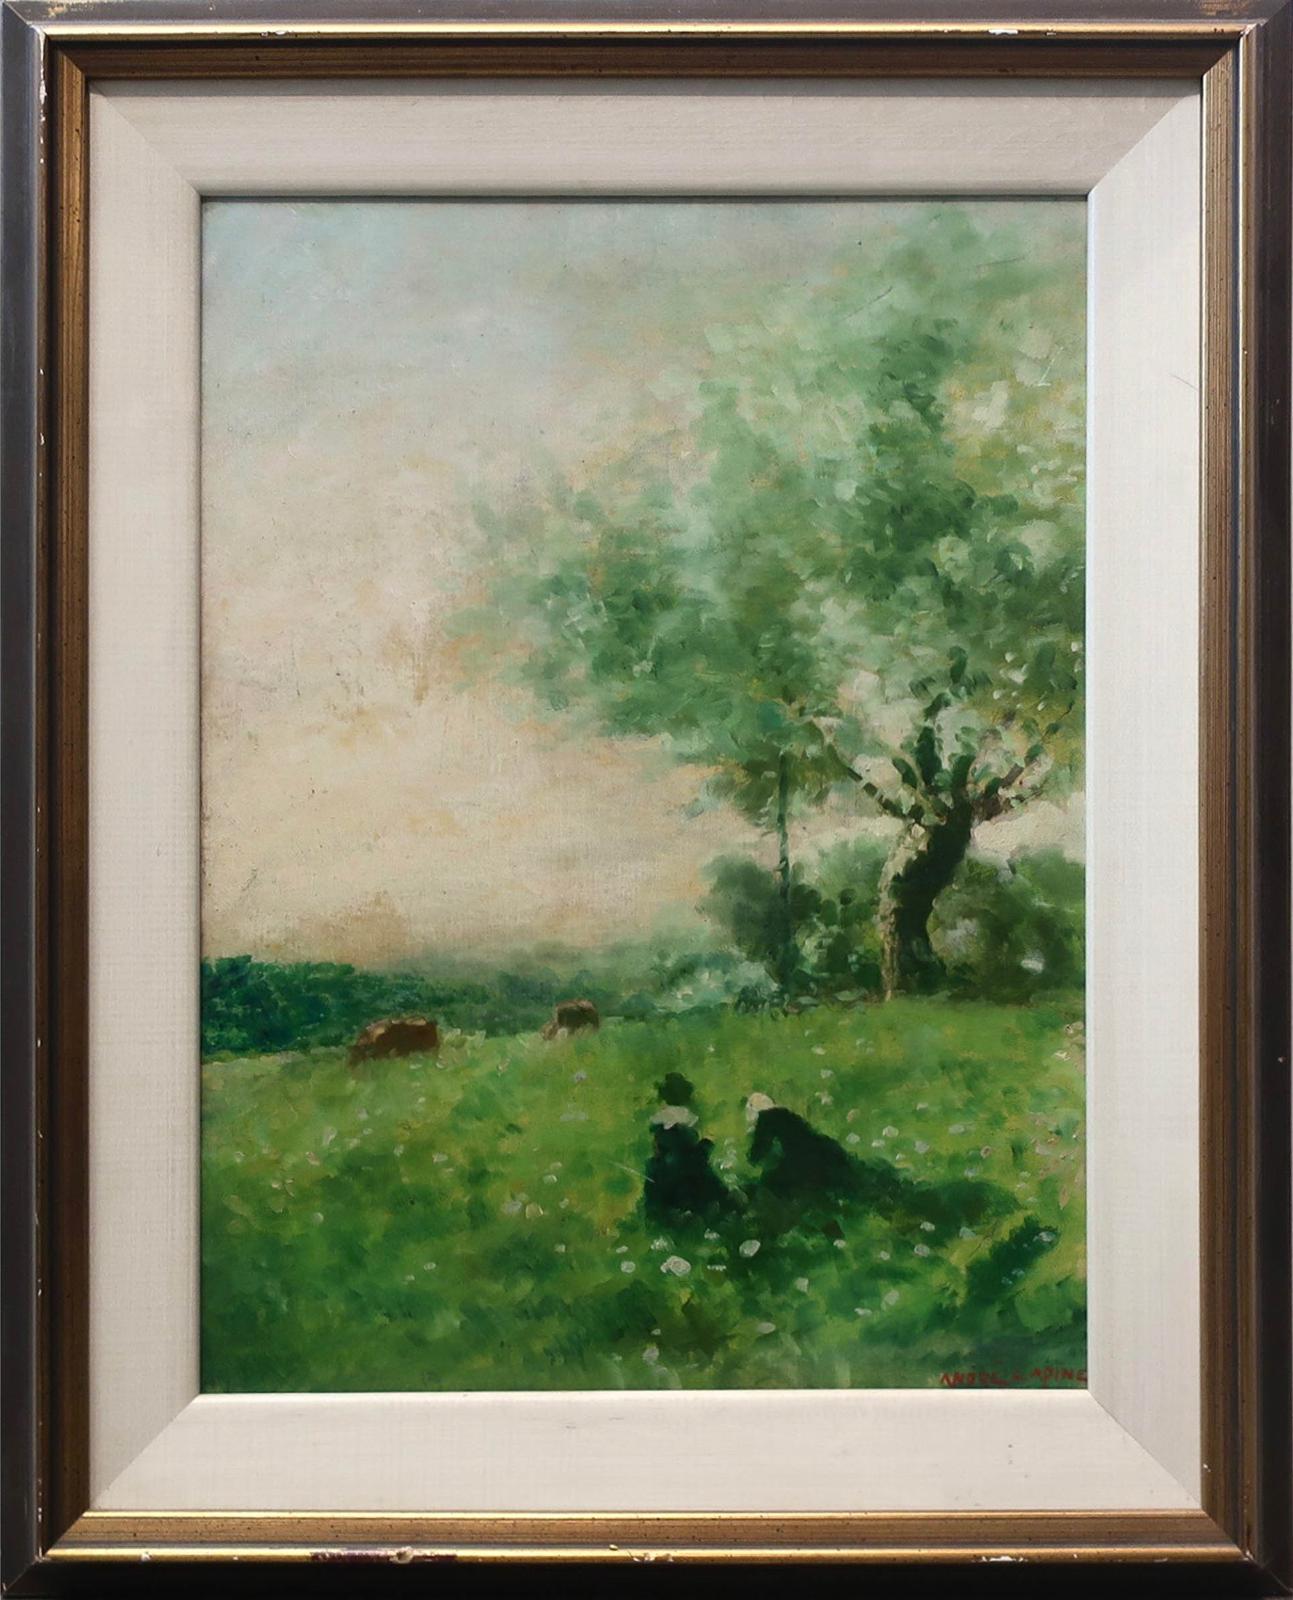 Andreas Christian Gottfried (André) Lapine (1866-1952) - Untitled (Field Study With Two Ladies And Cows)